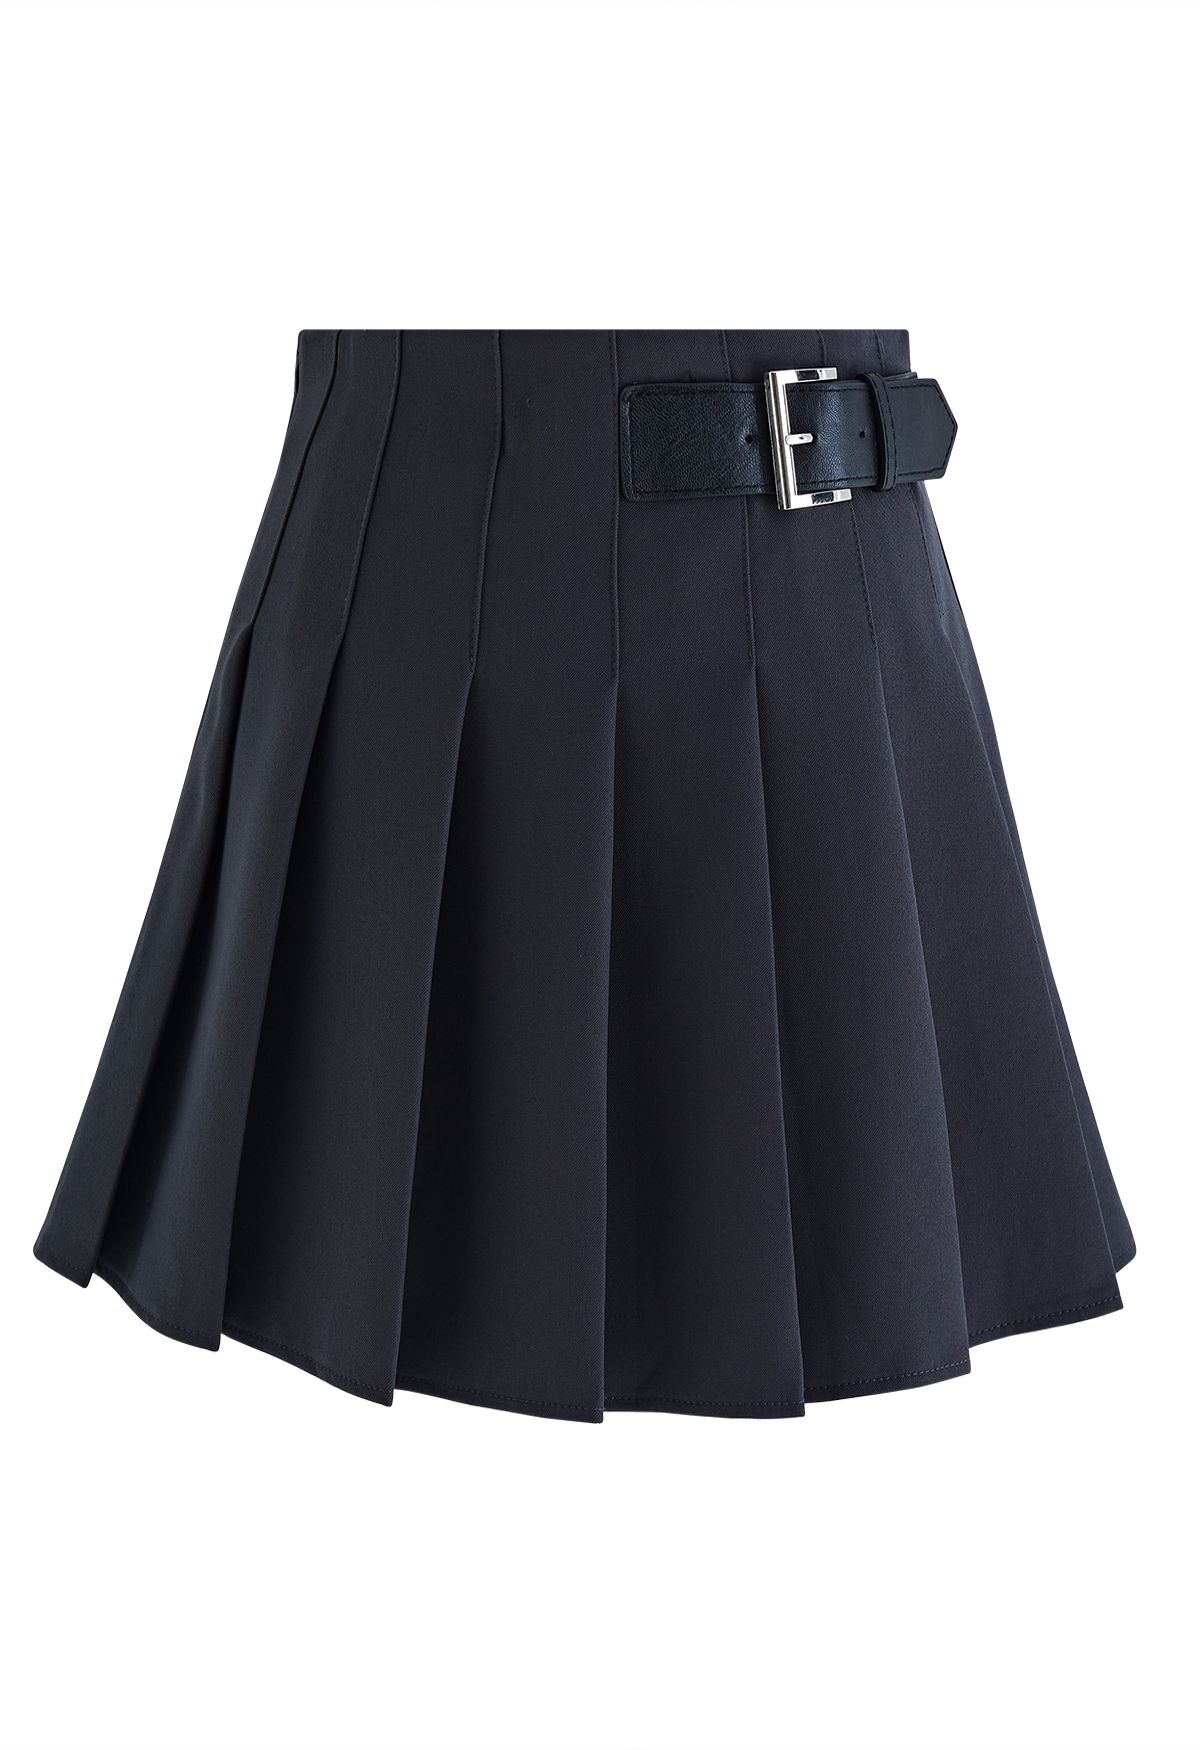 Belted Pleated Flare Mini Skirt in Smoke - Retro, Indie and Unique Fashion